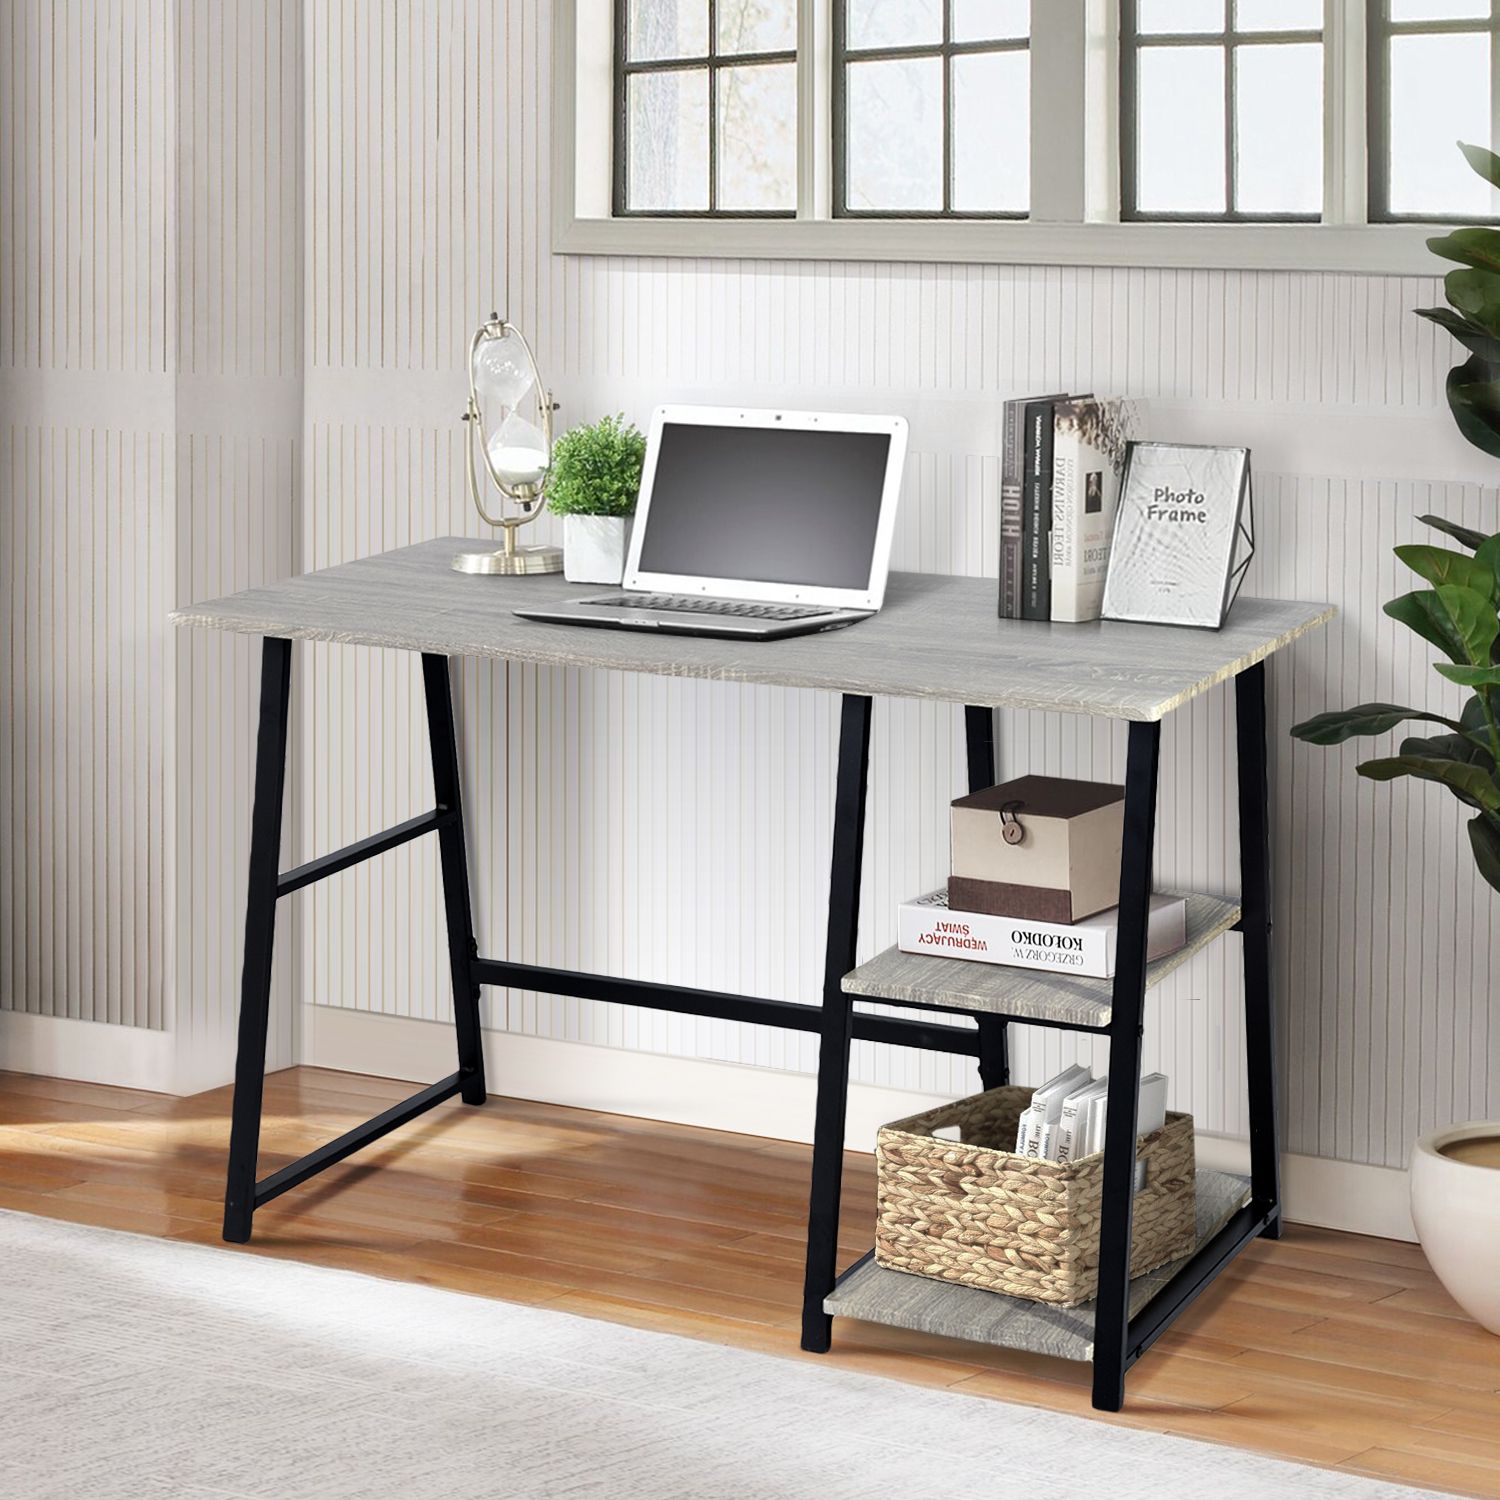 Furniturer Modern Computer Writing Desk With 2 Storage Shelves, Grey With Most Current Black And Gray Oval Writing Desks (View 13 of 15)